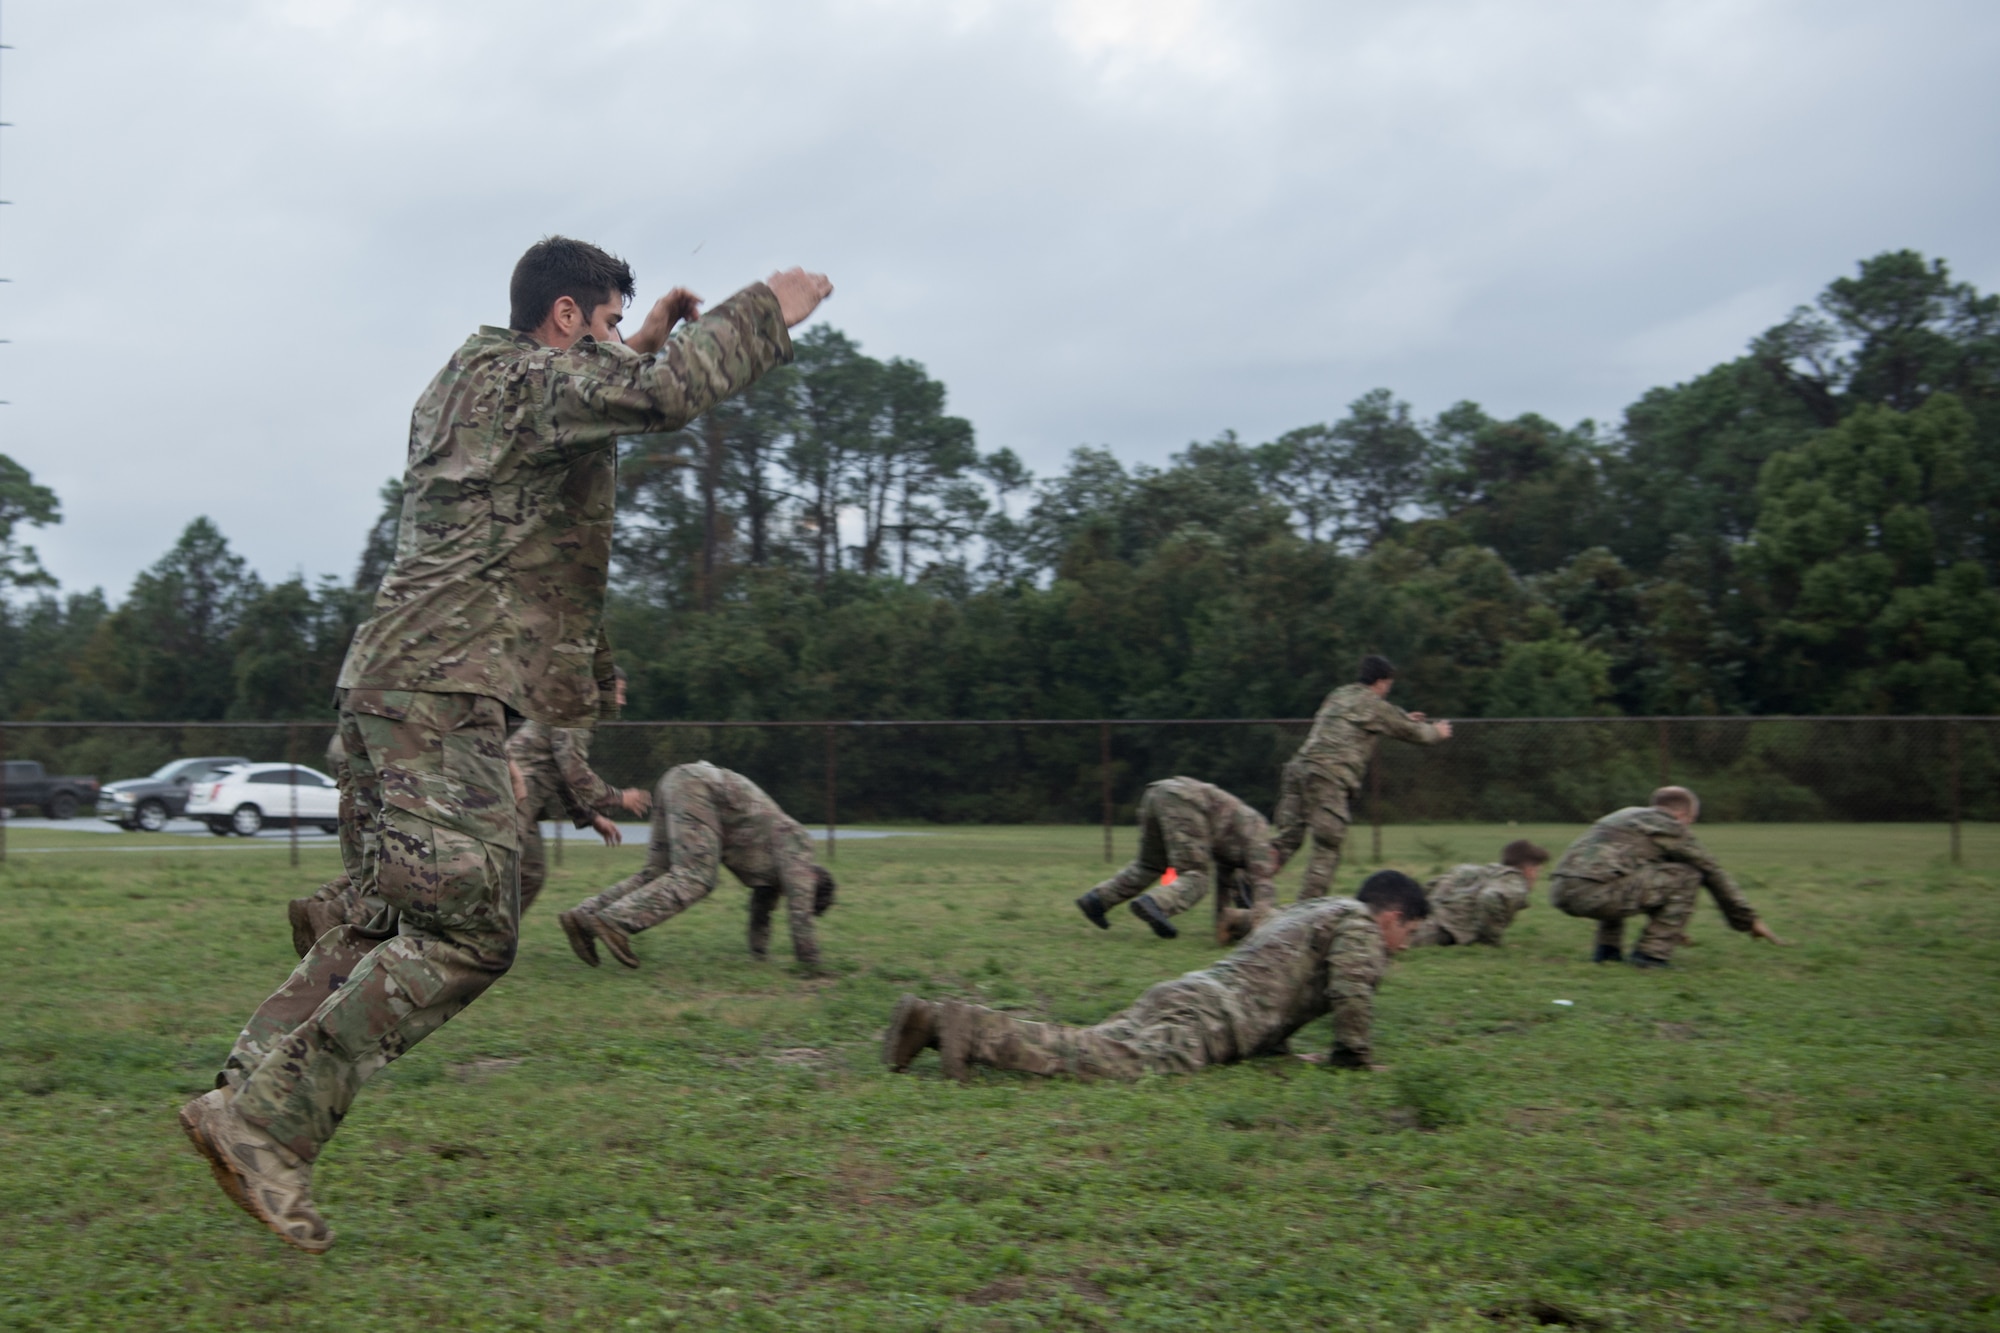 We have a side view of Special Tactics Tactical Air Control Party candidates conducting "Flying Burpees." Some are rocking forward on the ground while others are jumping into the air.